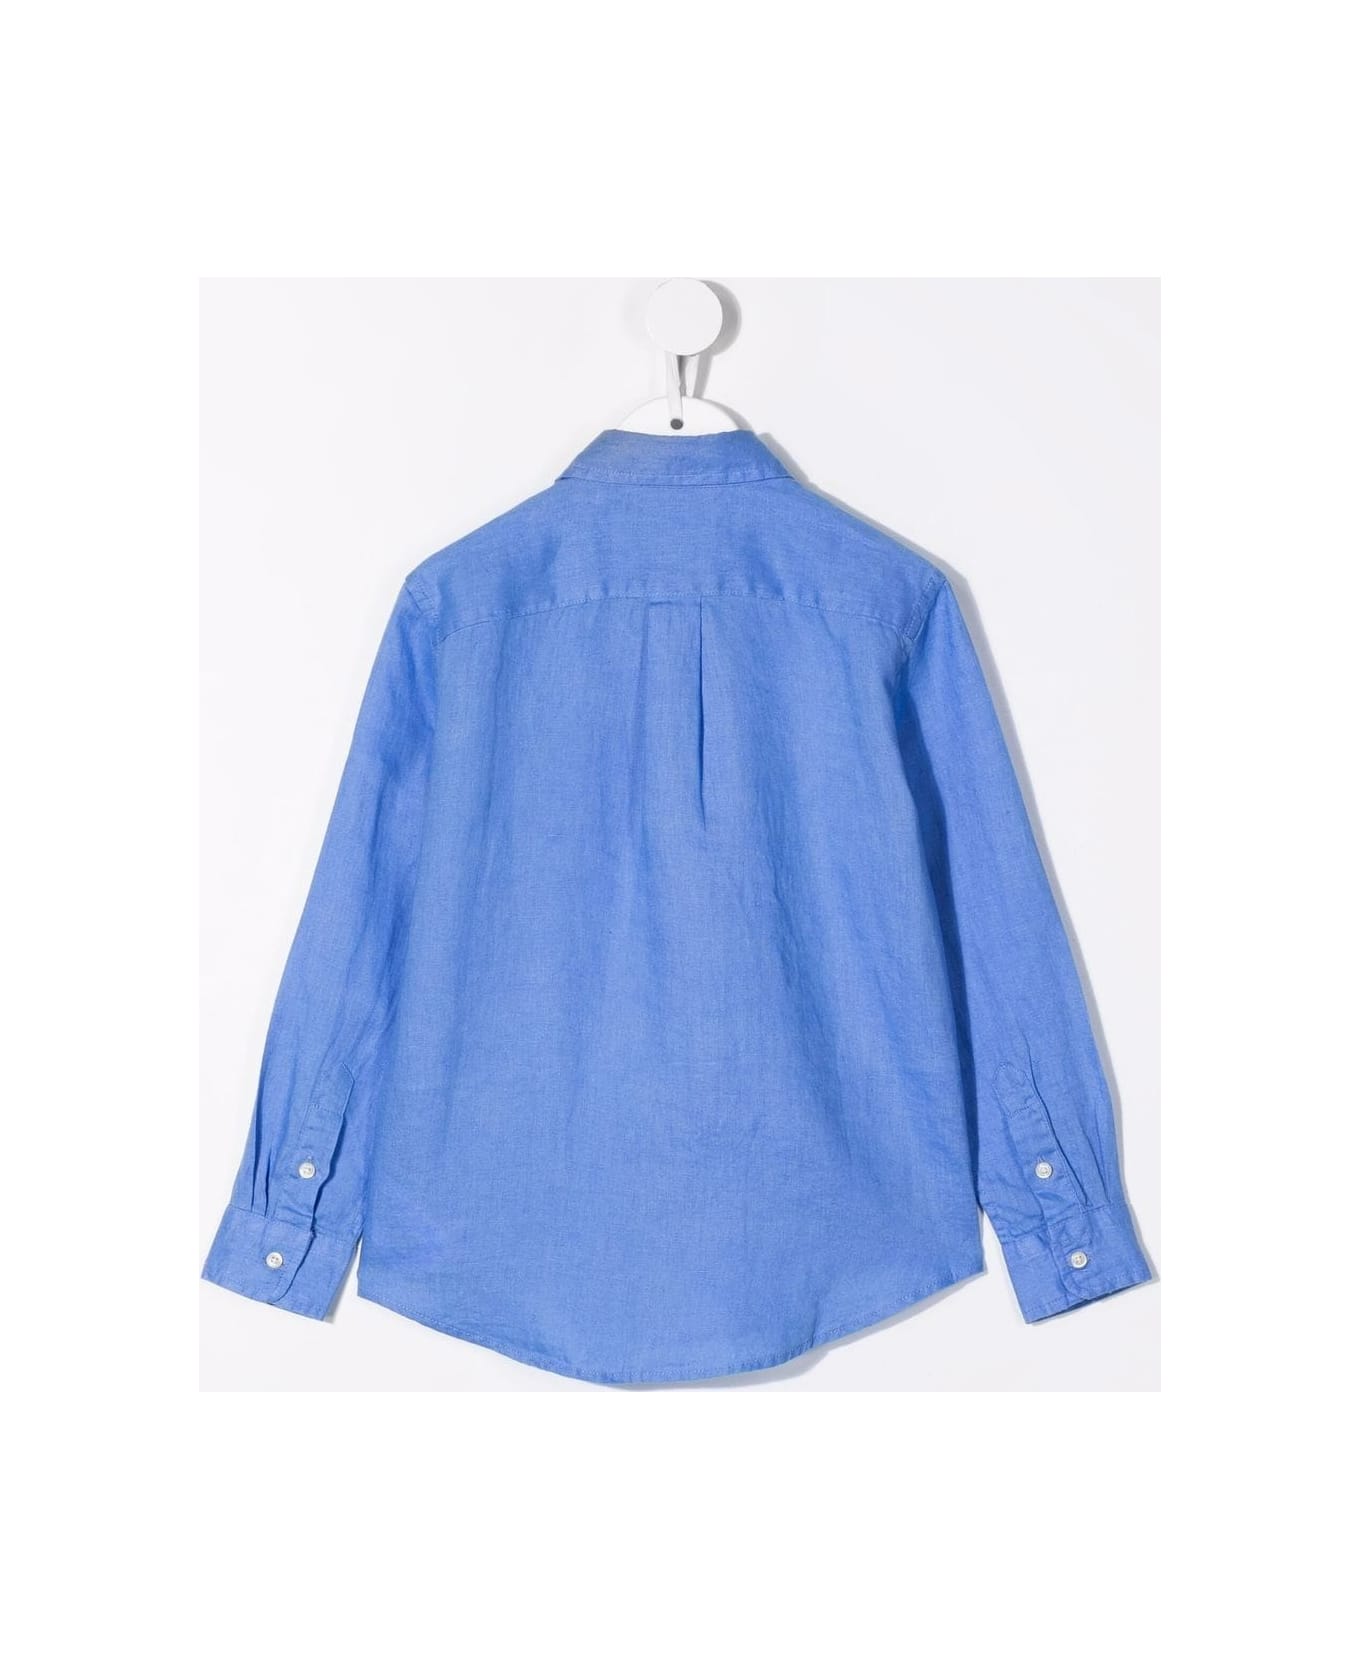 Ralph Lauren Blue Linen Shirt With Embroidered Pony - Blue シャツ